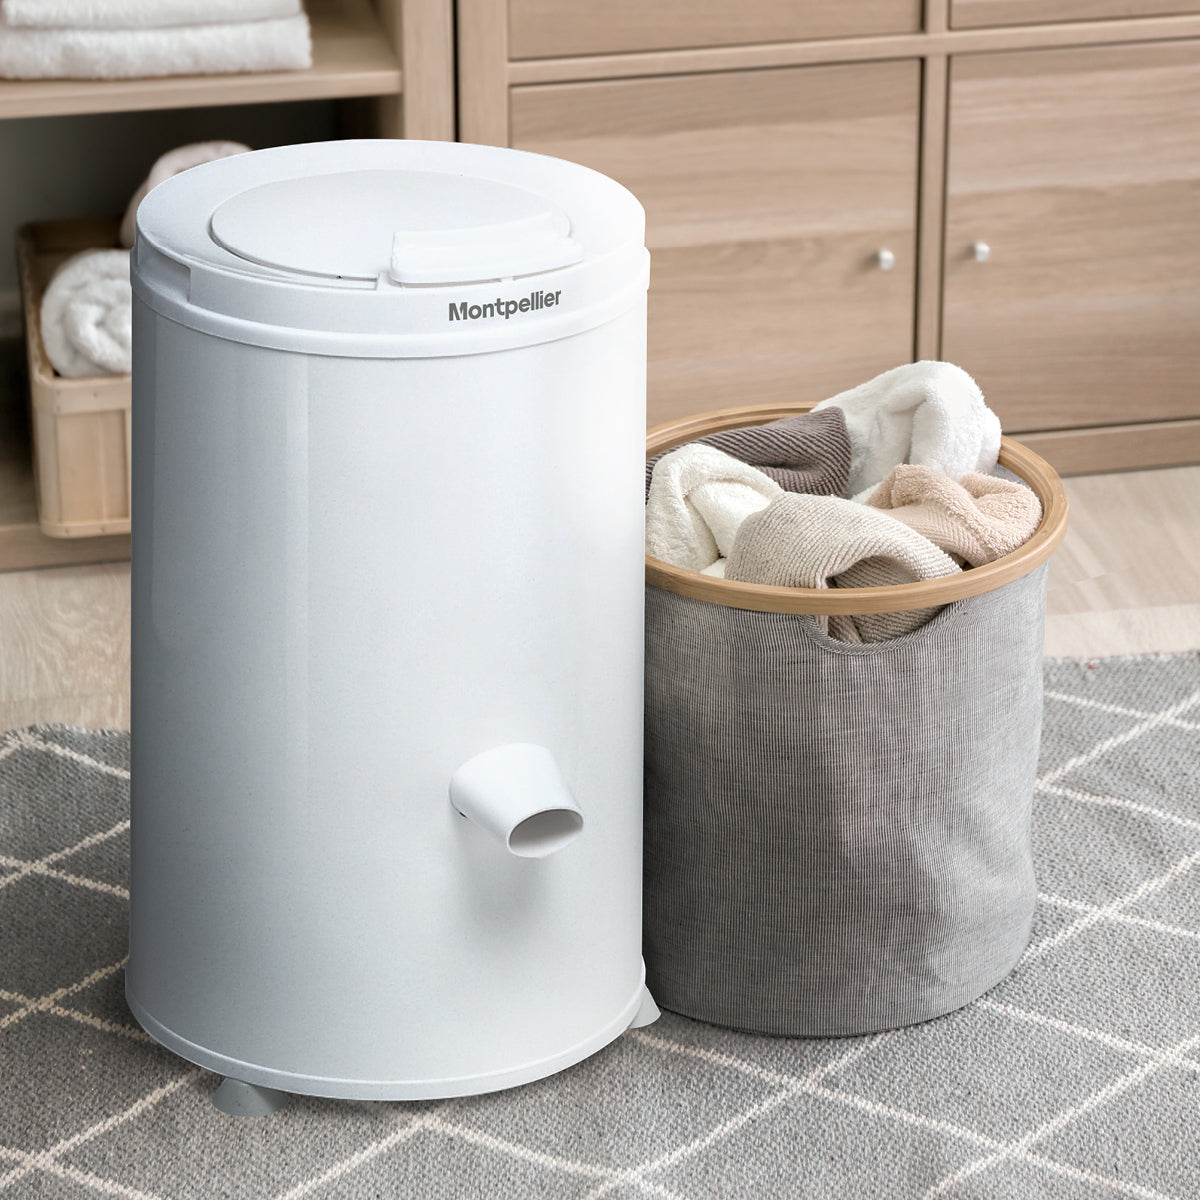 MONTPELLIER WHITE 3KG GRAVITY 2800RPM SPIN DRYER | MSD2800W *Online Deal Only